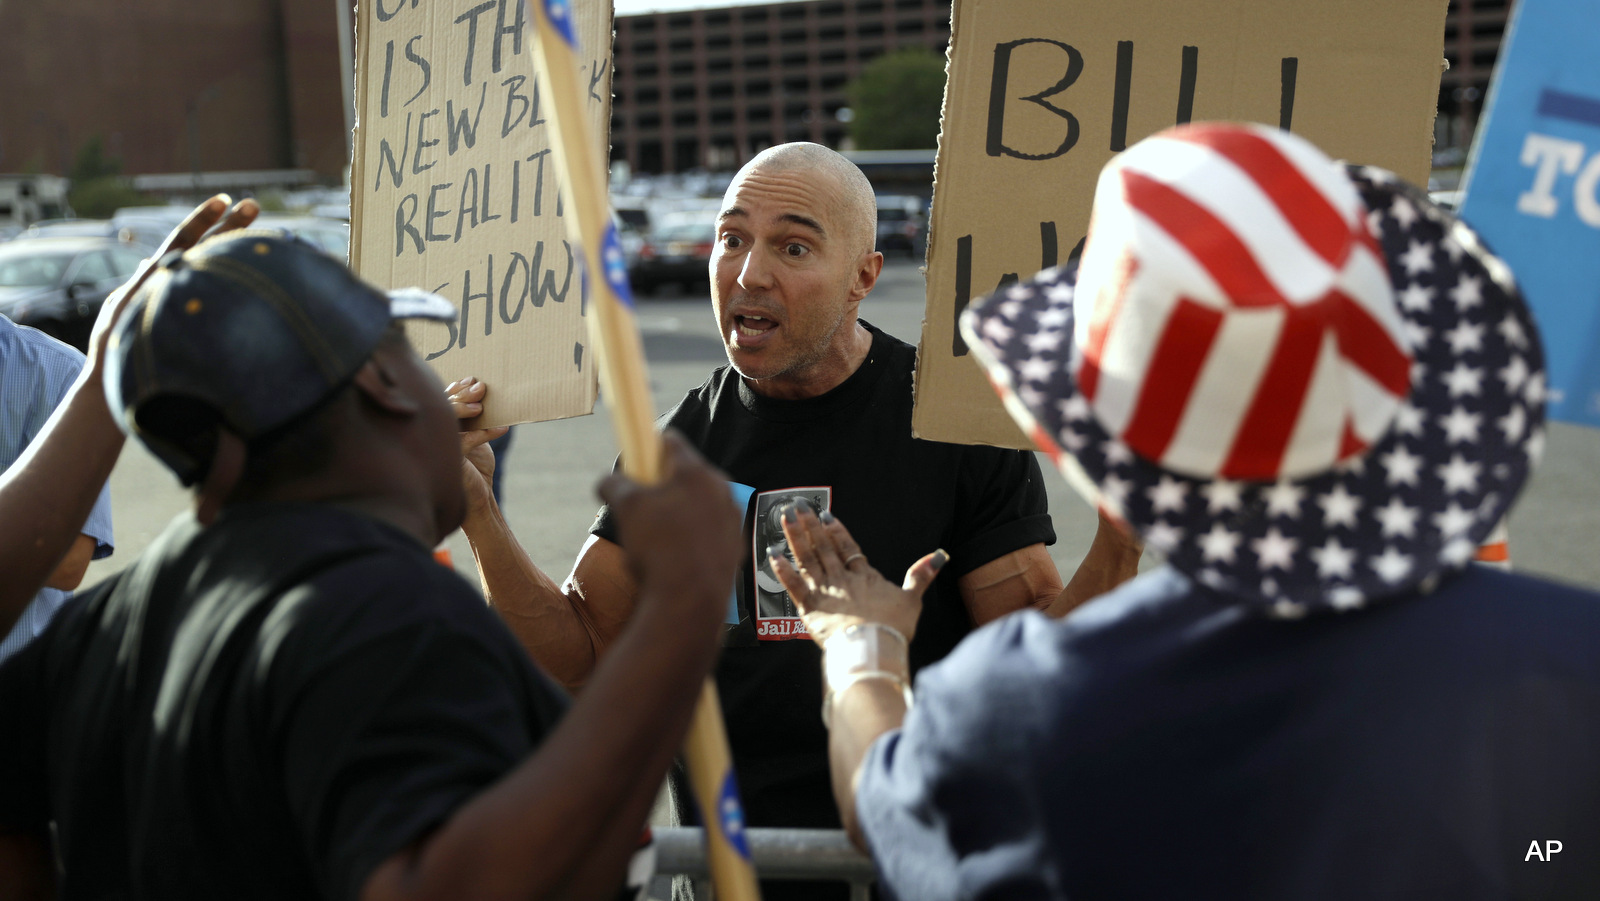 Mathew Burgart, center, a supporter of Republican presidential candidate Donald Trump, argues with supporters of Democratic presidential candidate Hillary Clinton before a rally with Clinton, Wednesday, Oct. 12, 2016, in Las Vegas.